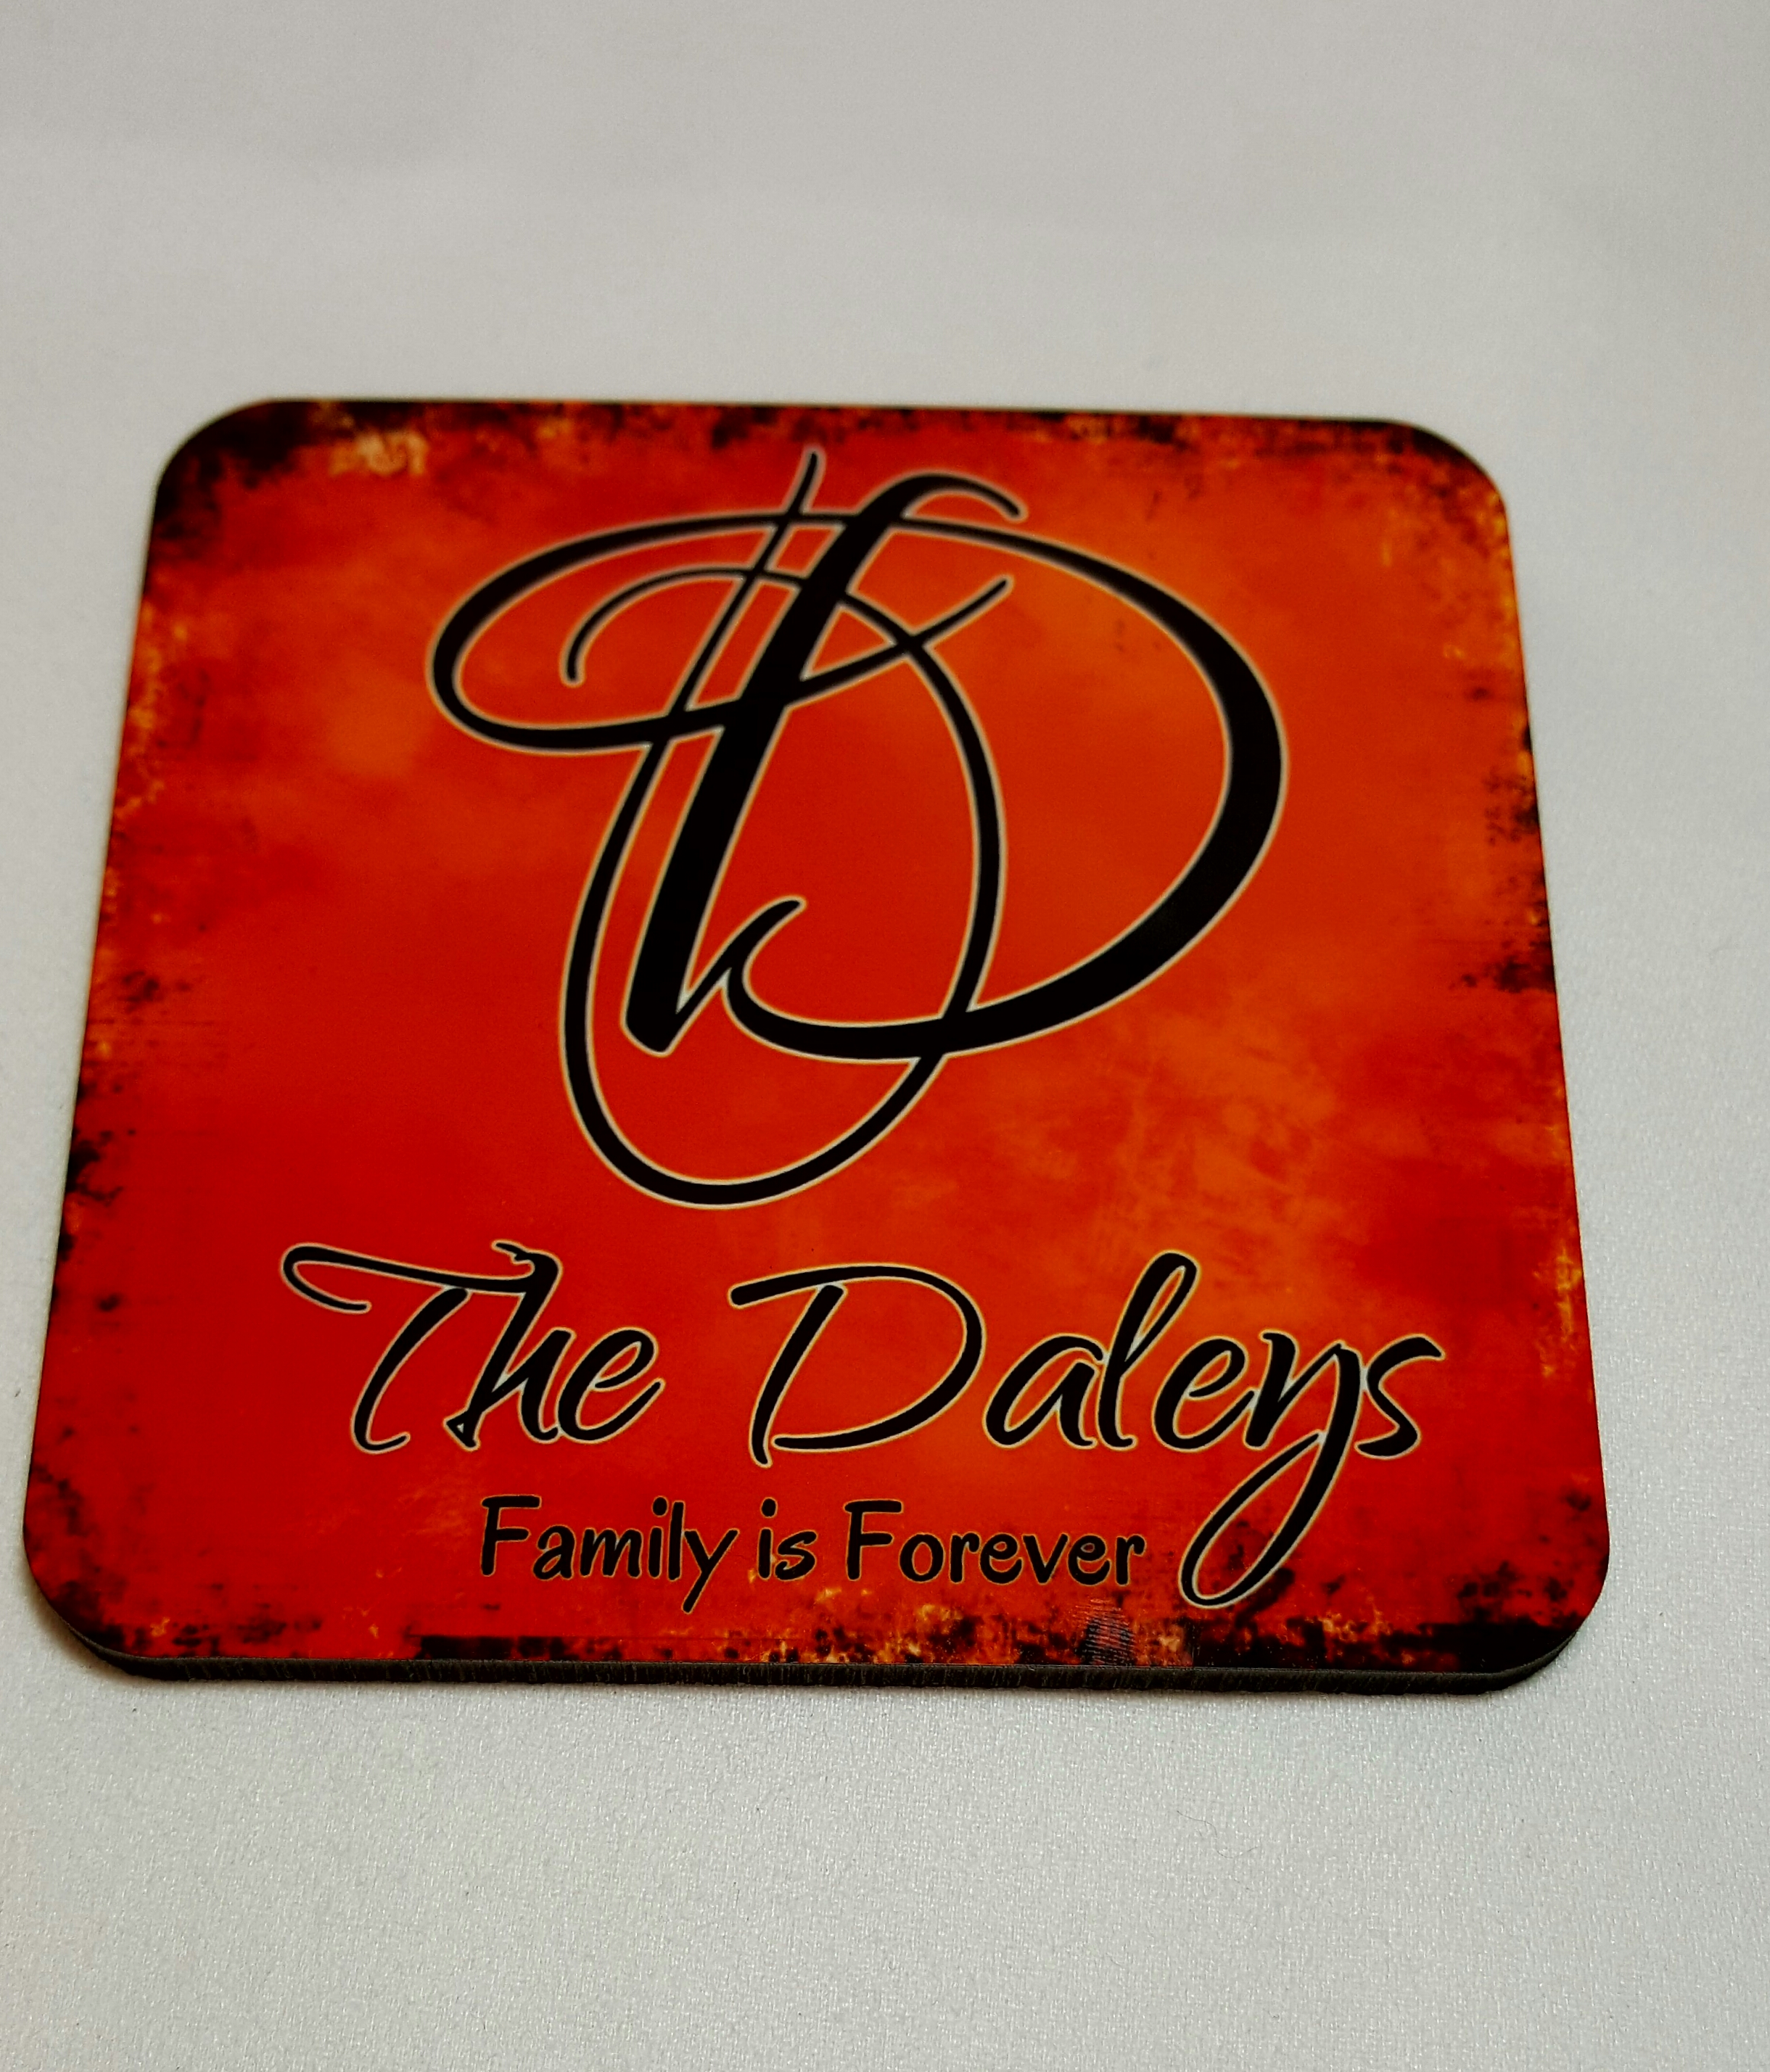 The Daleys made with sublimation printing